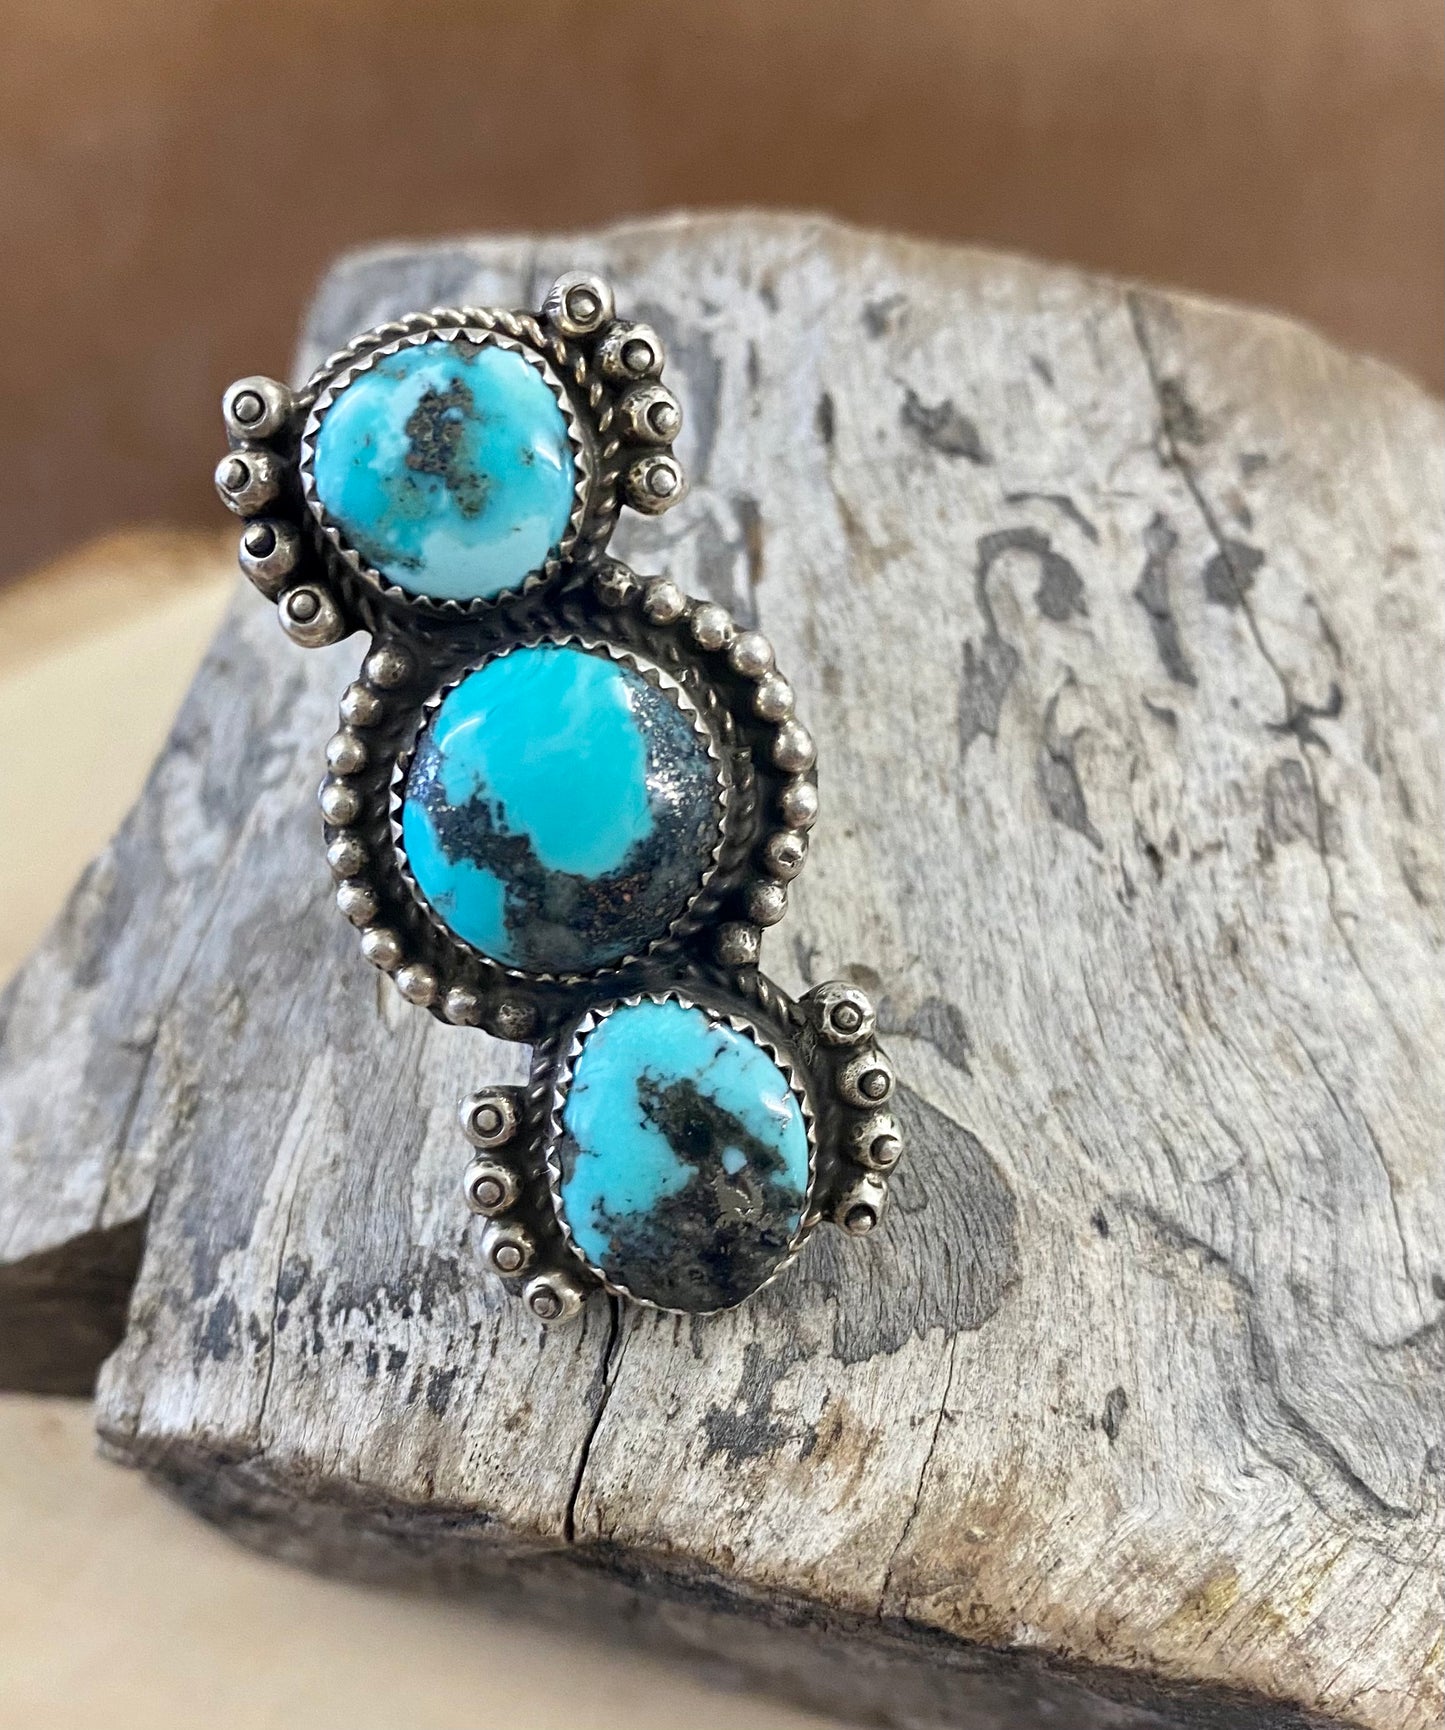 The Triple Stone Turquoise Ring (Size 8.5)